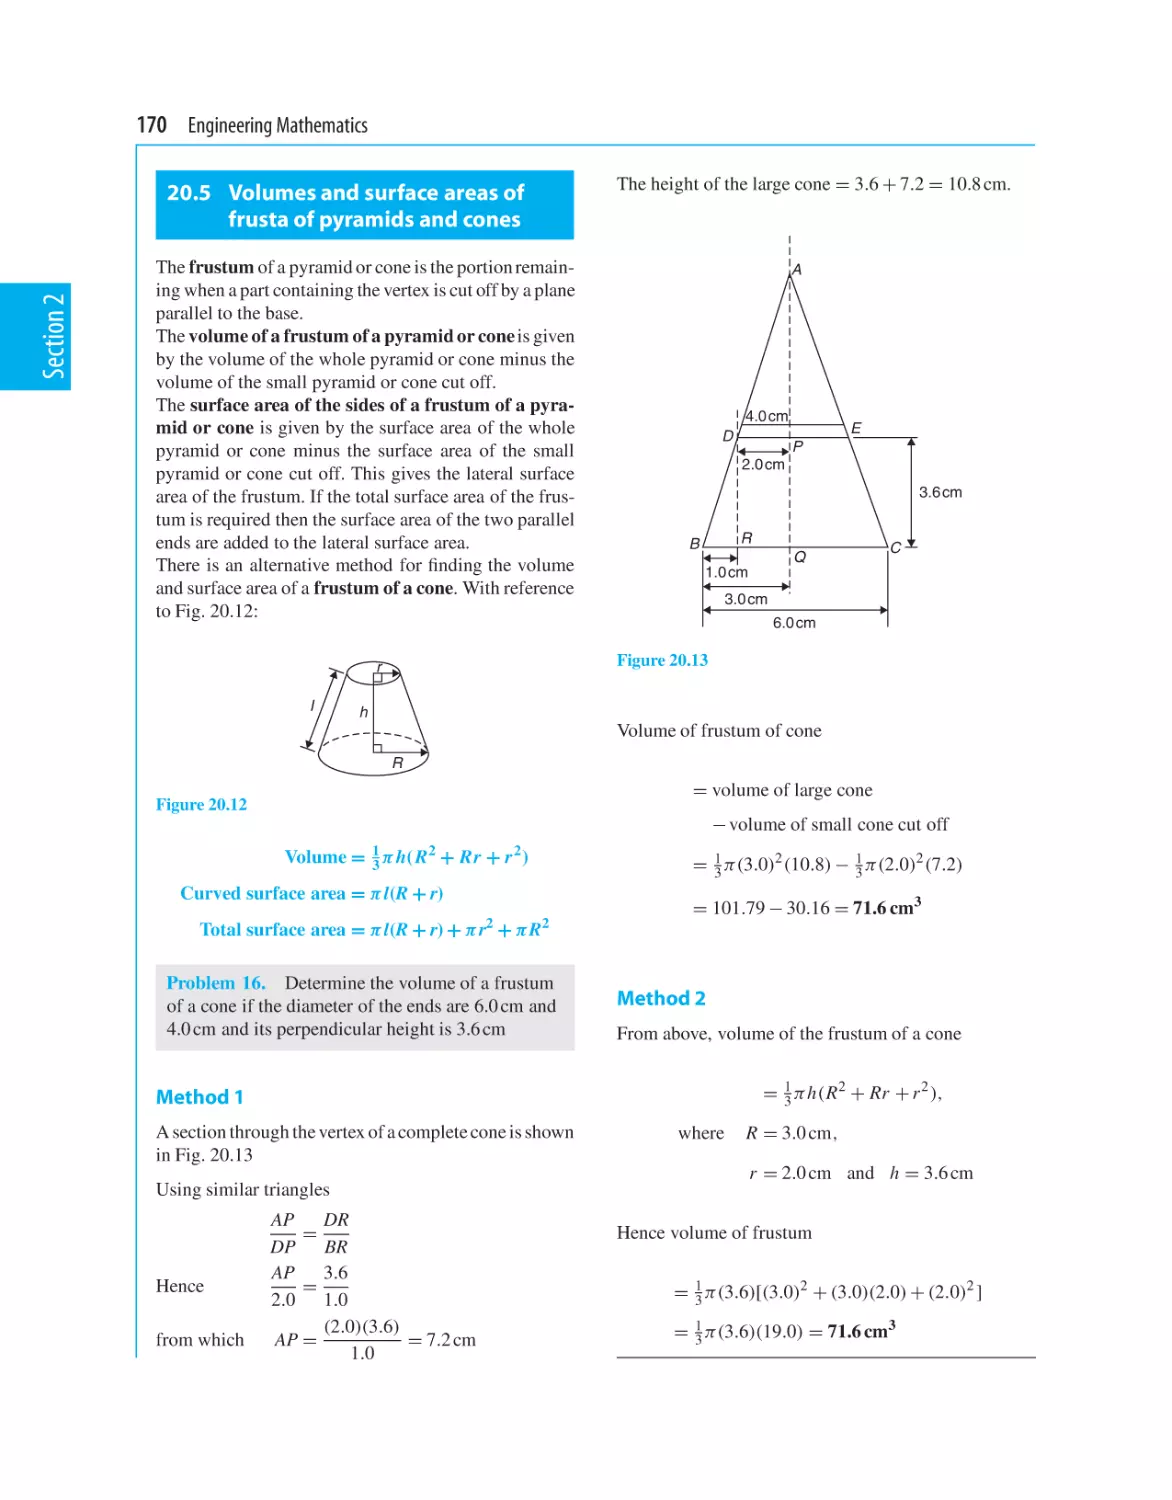 20.5 Volumes and surface areas of frusta of pyramids and cones